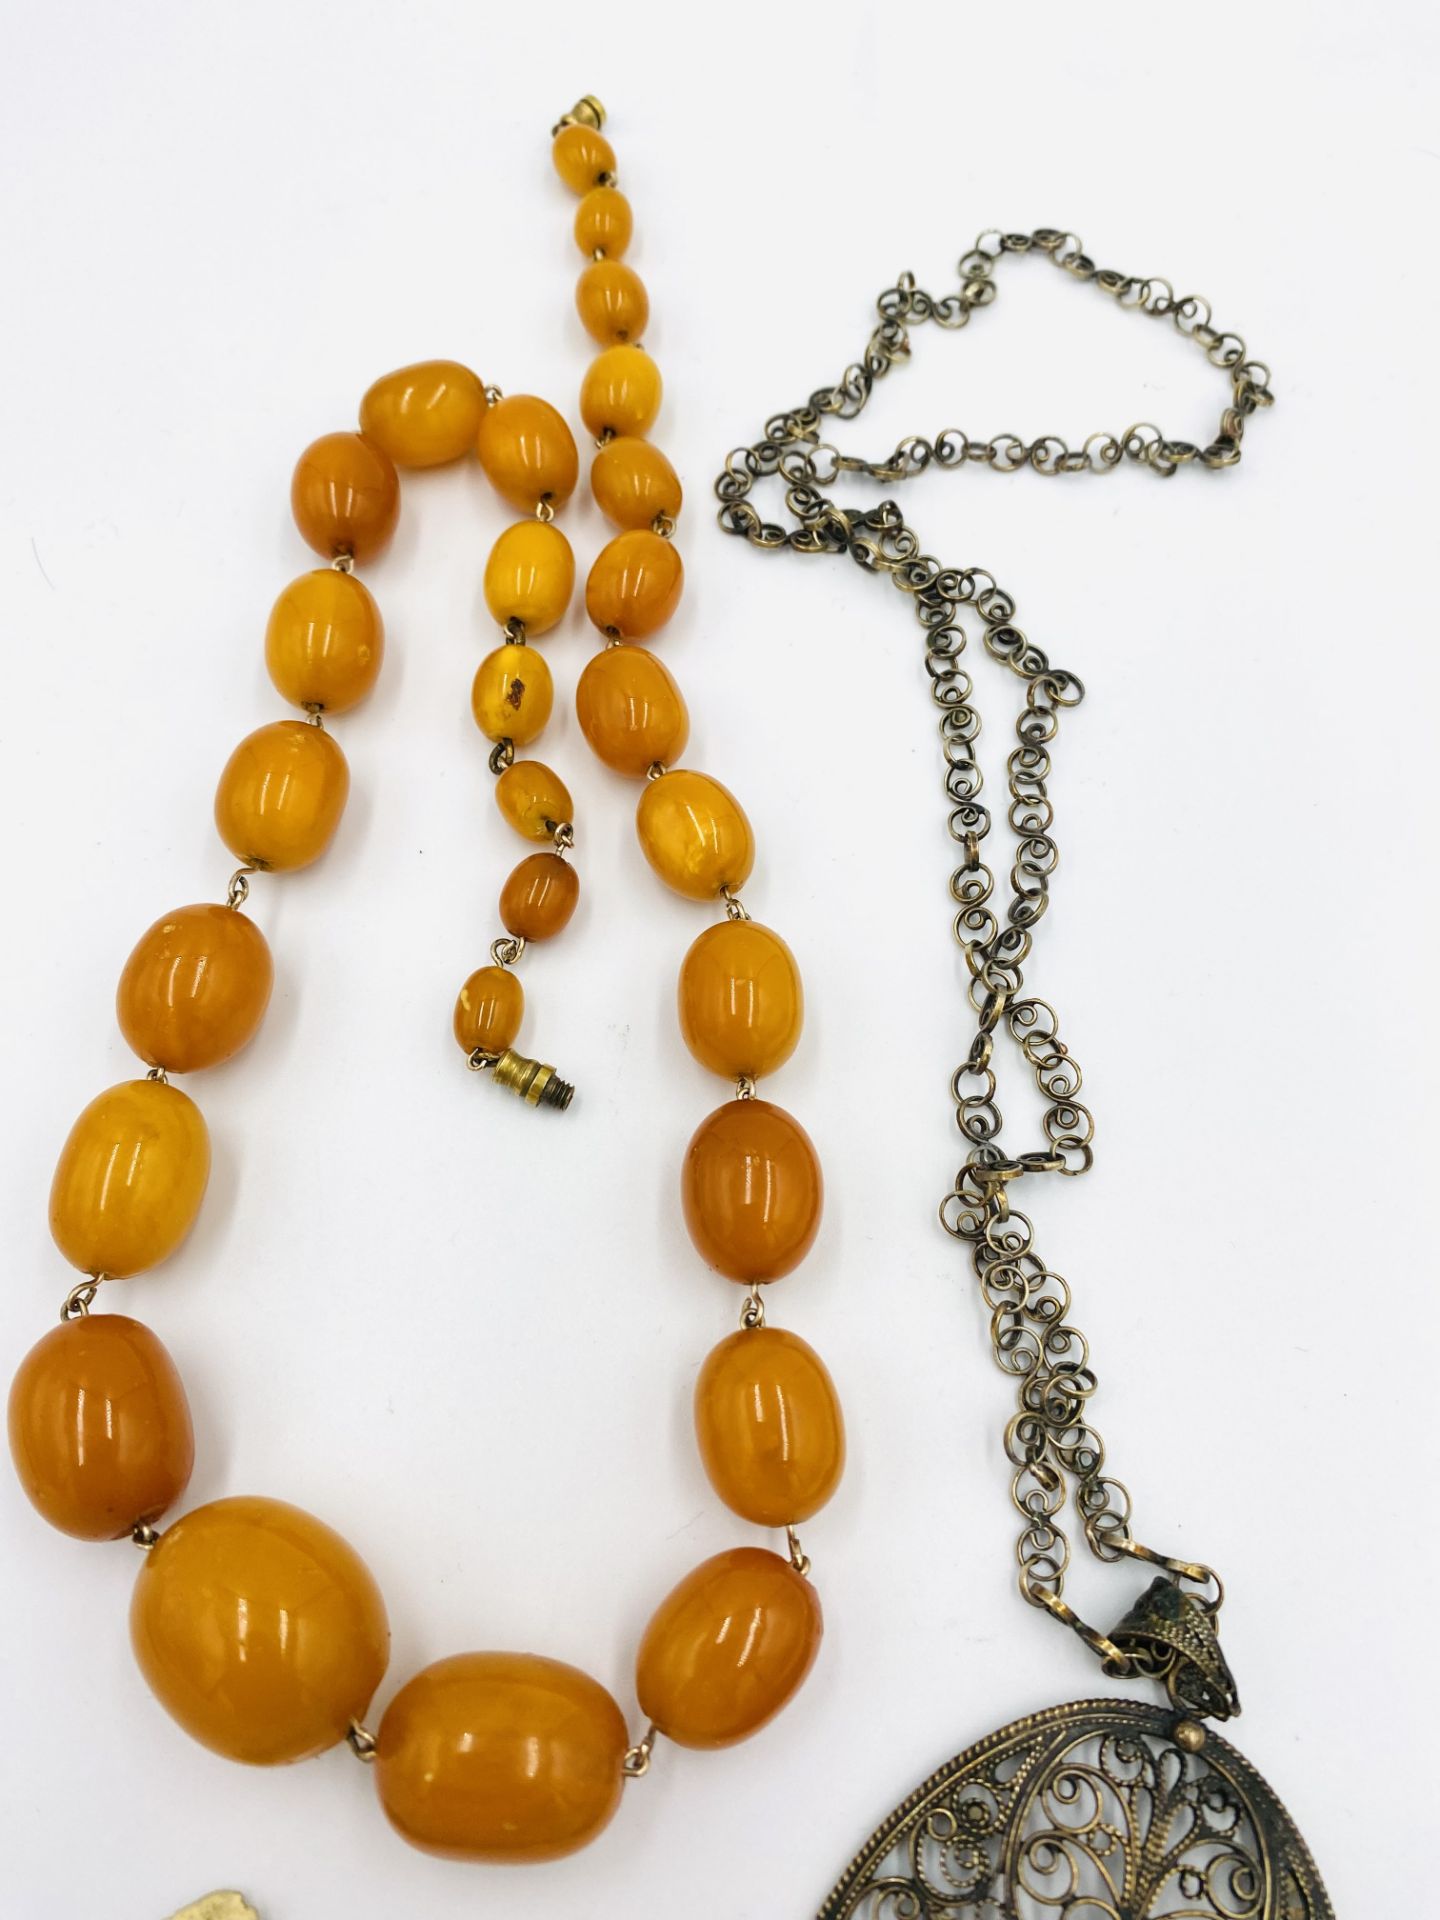 Amber bead necklace; filigree pendant necklace and a child's charm bracelet - Image 3 of 4